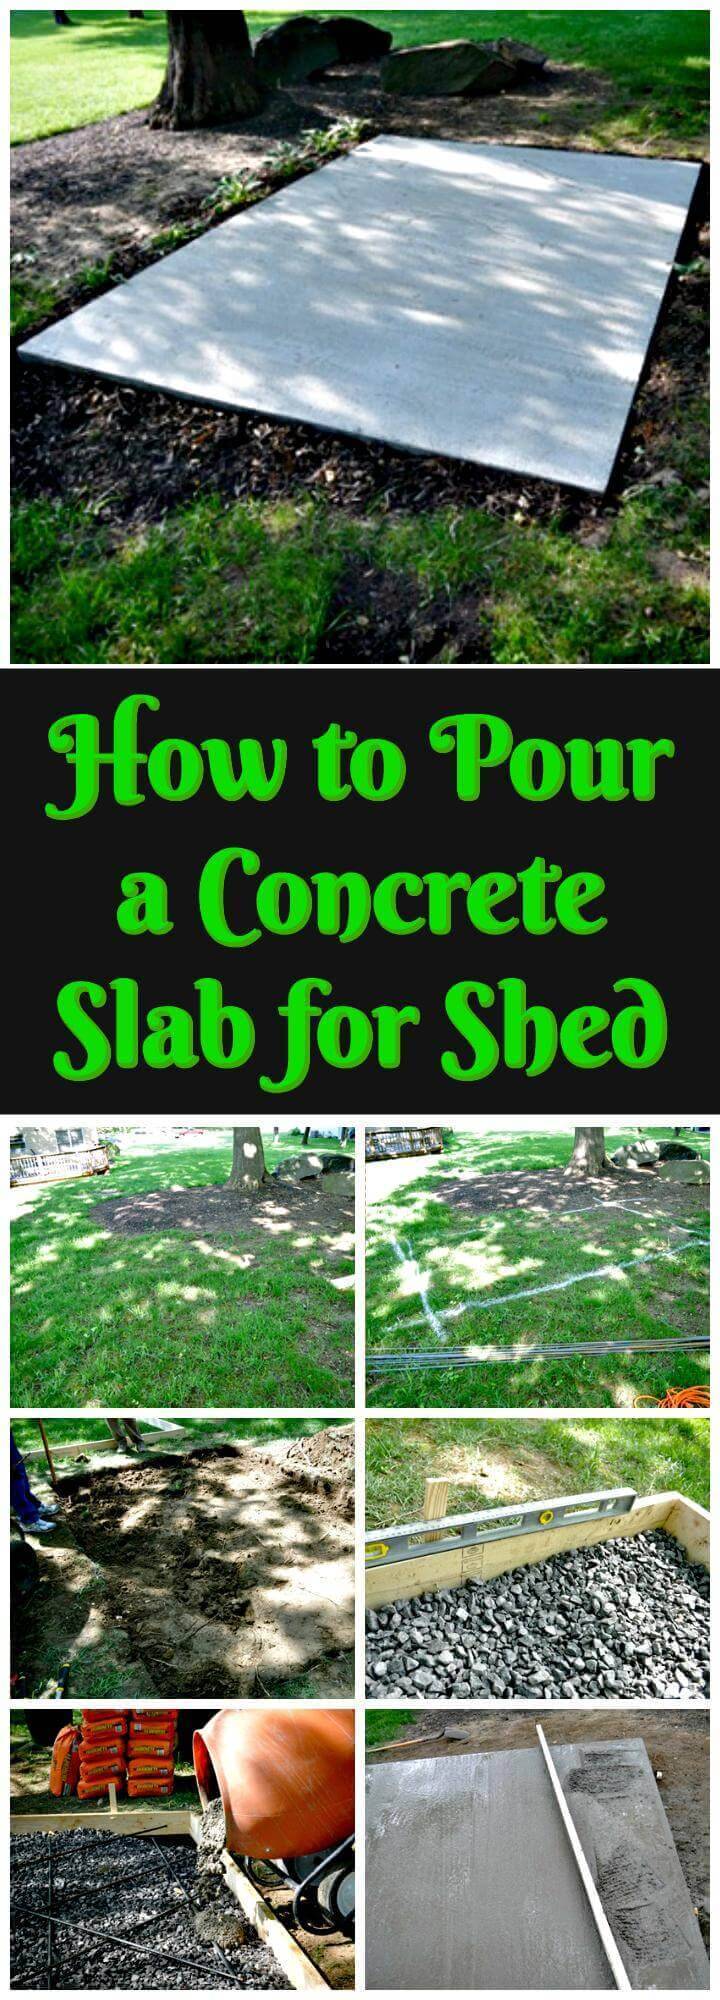 DIY tutorial about how to pour a concrete slab for shed